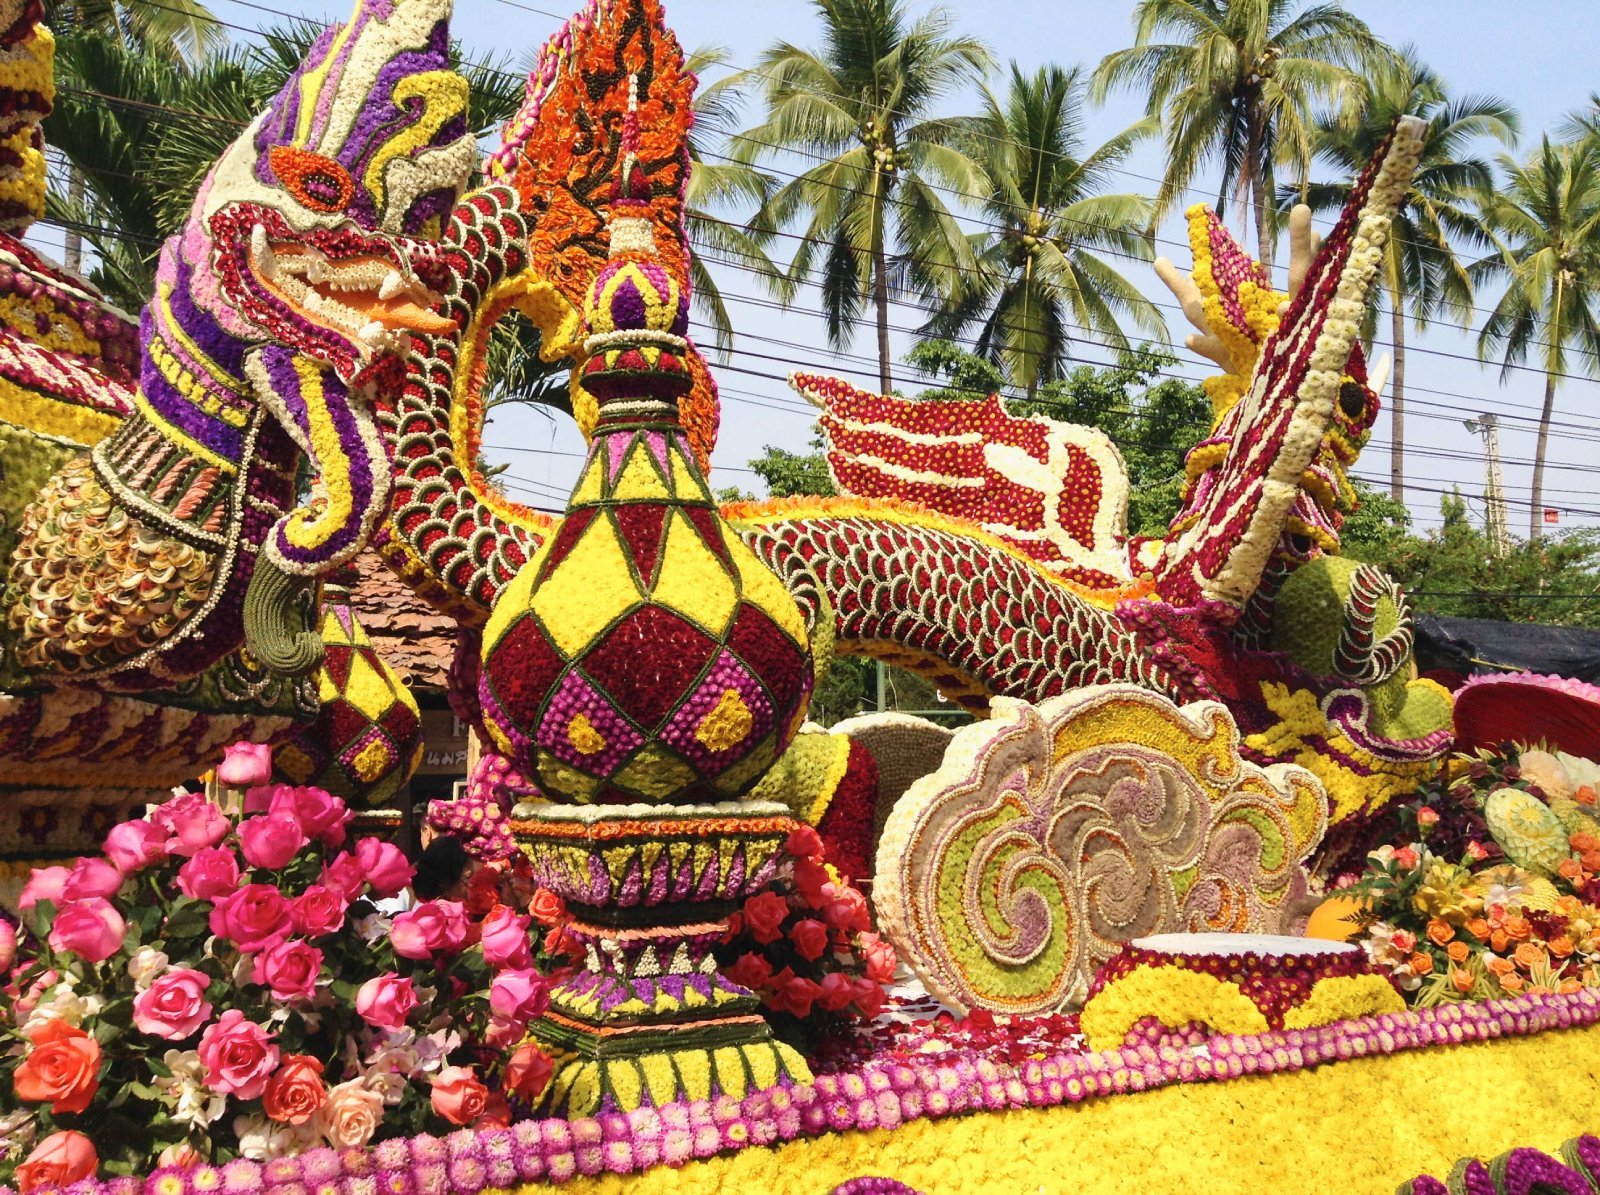 <p class="wp-caption-text">Image Credit: Shutterstock / FootageLab</p>  <p><span>Held in February, the Chiang Mai Flower Festival marks the end of the cool season with vibrant floral parades, beauty contests, and markets. The city’s public spaces are adorned with floral arrangements, highlighting local and tropical flowers.</span></p> <p><b>Insider’s Tip: </b><span>Visit Suan Buak Haad Park to see the flower displays and competitions.</span></p> <p><b>When to Travel: </b><span>Early February</span></p> <p><b>How to Get There: </b><span>Chiang Mai is accessible by air from Bangkok and other major cities. The festival venues are within the city, reachable by tuk-tuk or songthaew.</span></p>